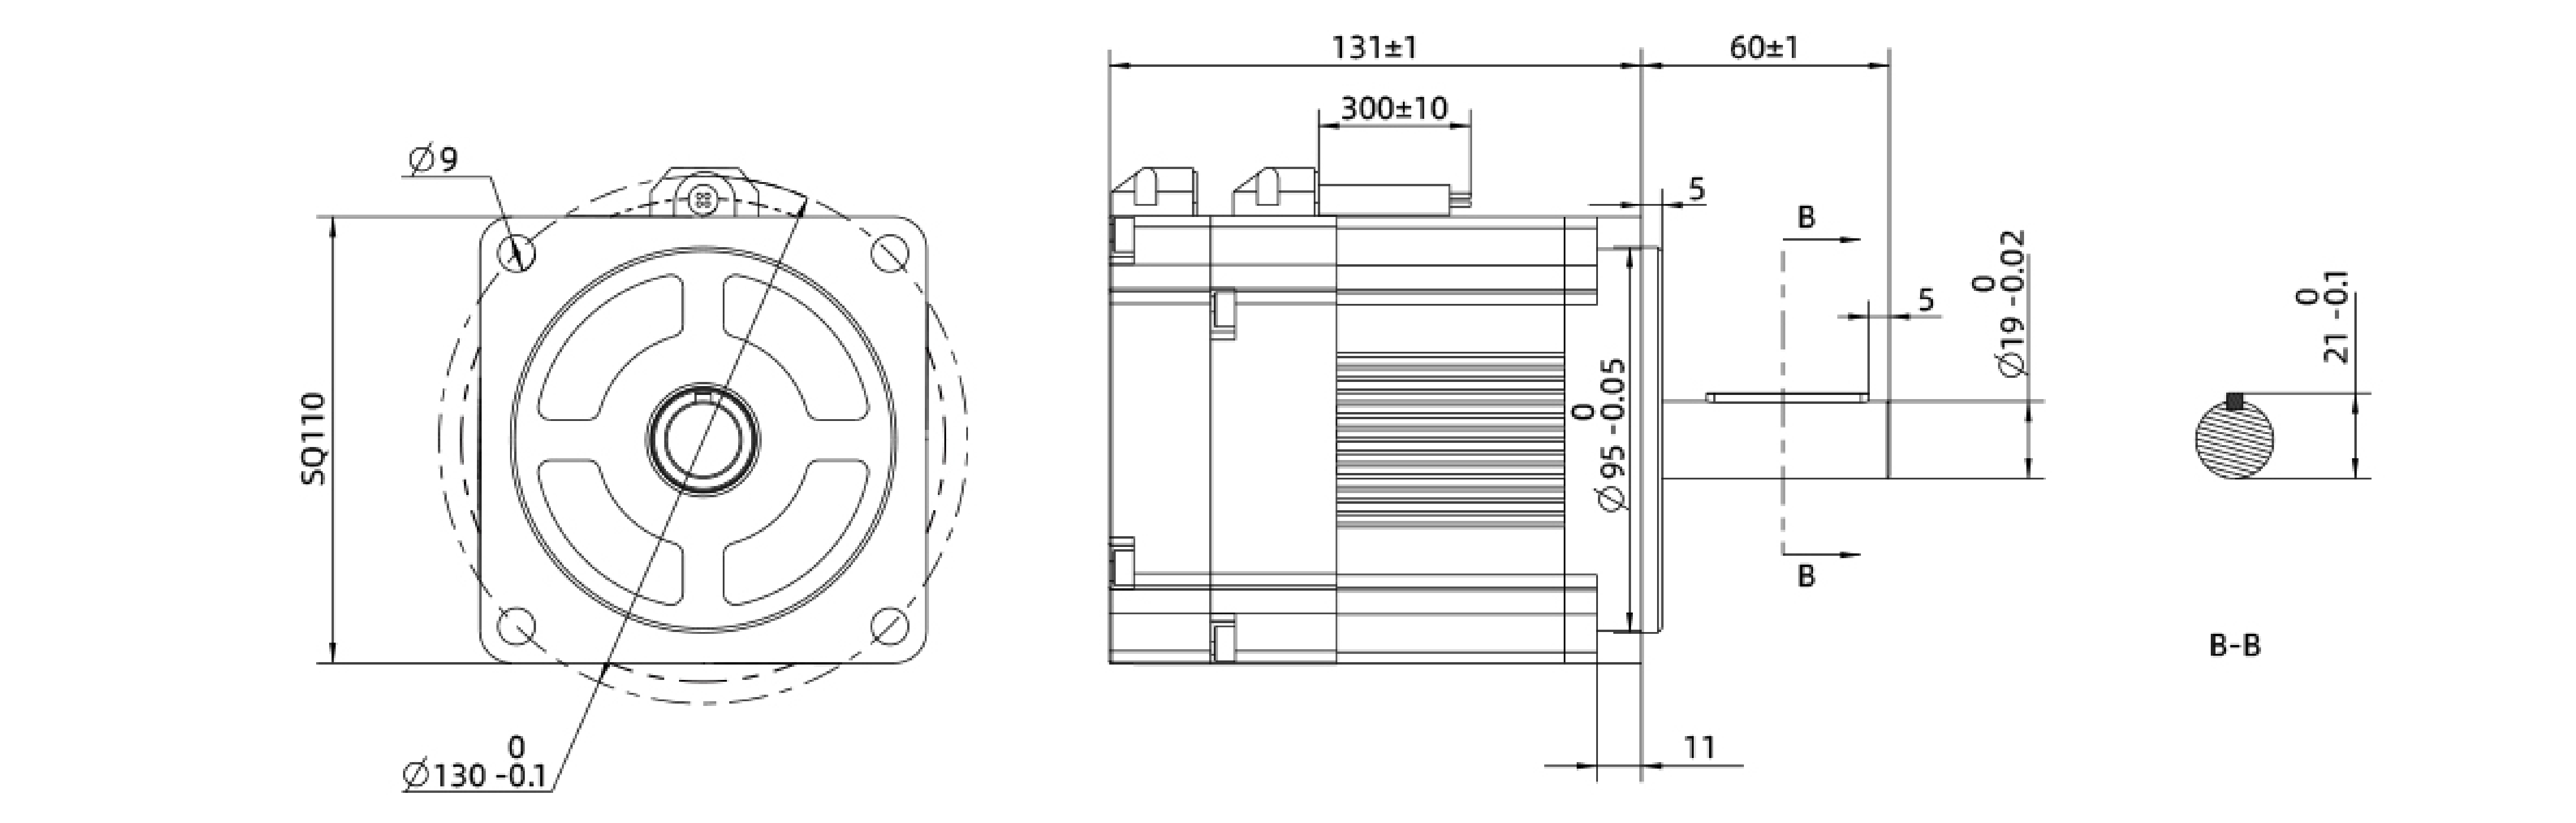 Brushless DC Motor Size 34 (110mm) Dimensional Drawing